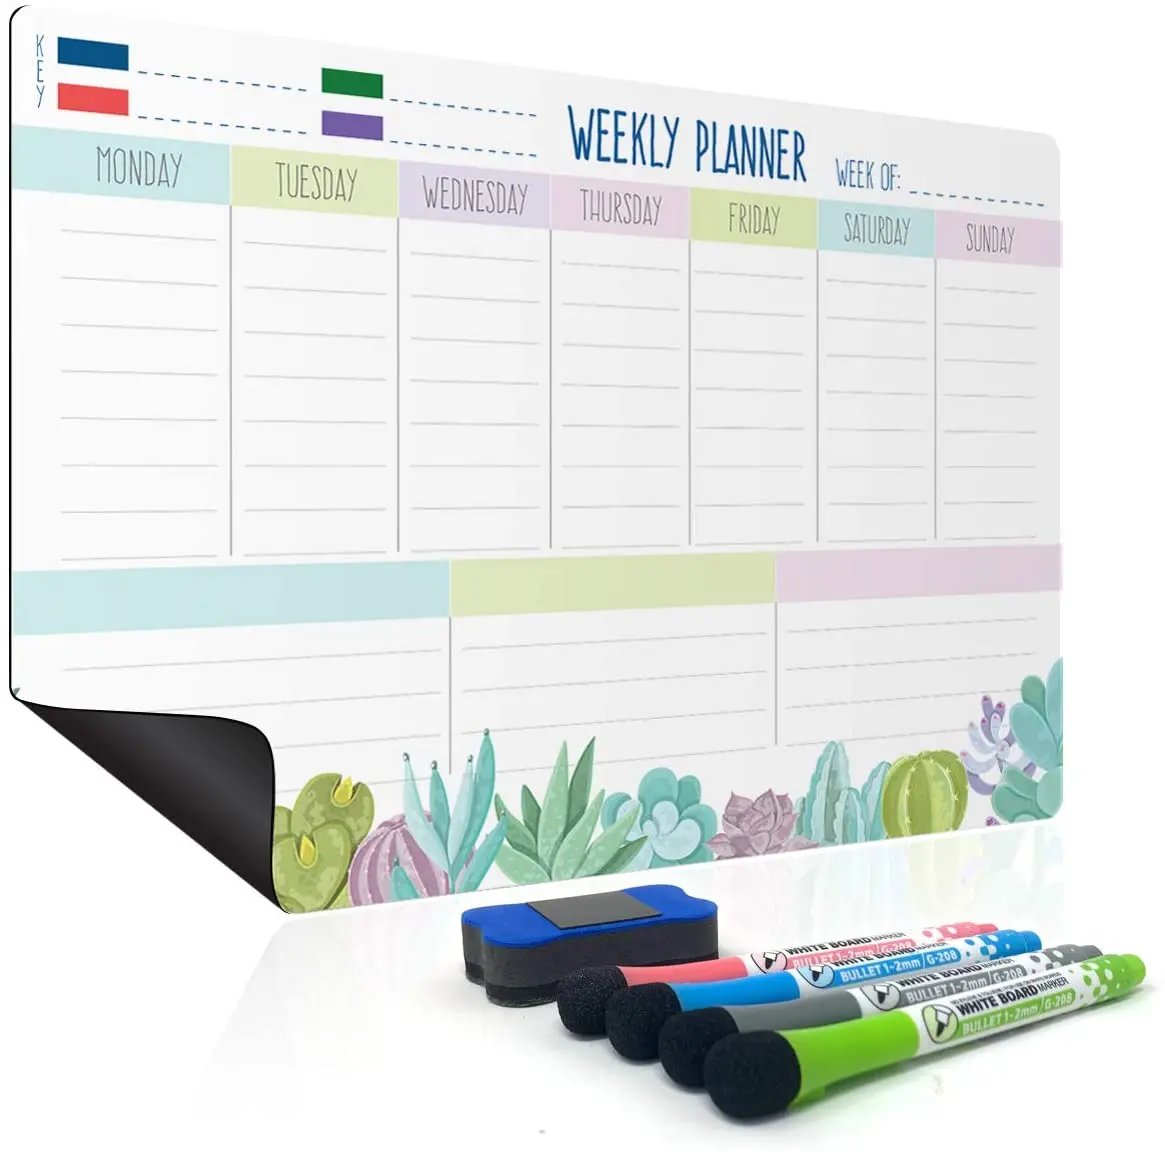 4 Fine Point Markers & Eraser Included Set of 2 Family Planner Whiteboard for Refrigerator,Weekly Organizer & Daily Notepad UCMD Magnetic Dry Erase Weekly Calendar Whiteboard 